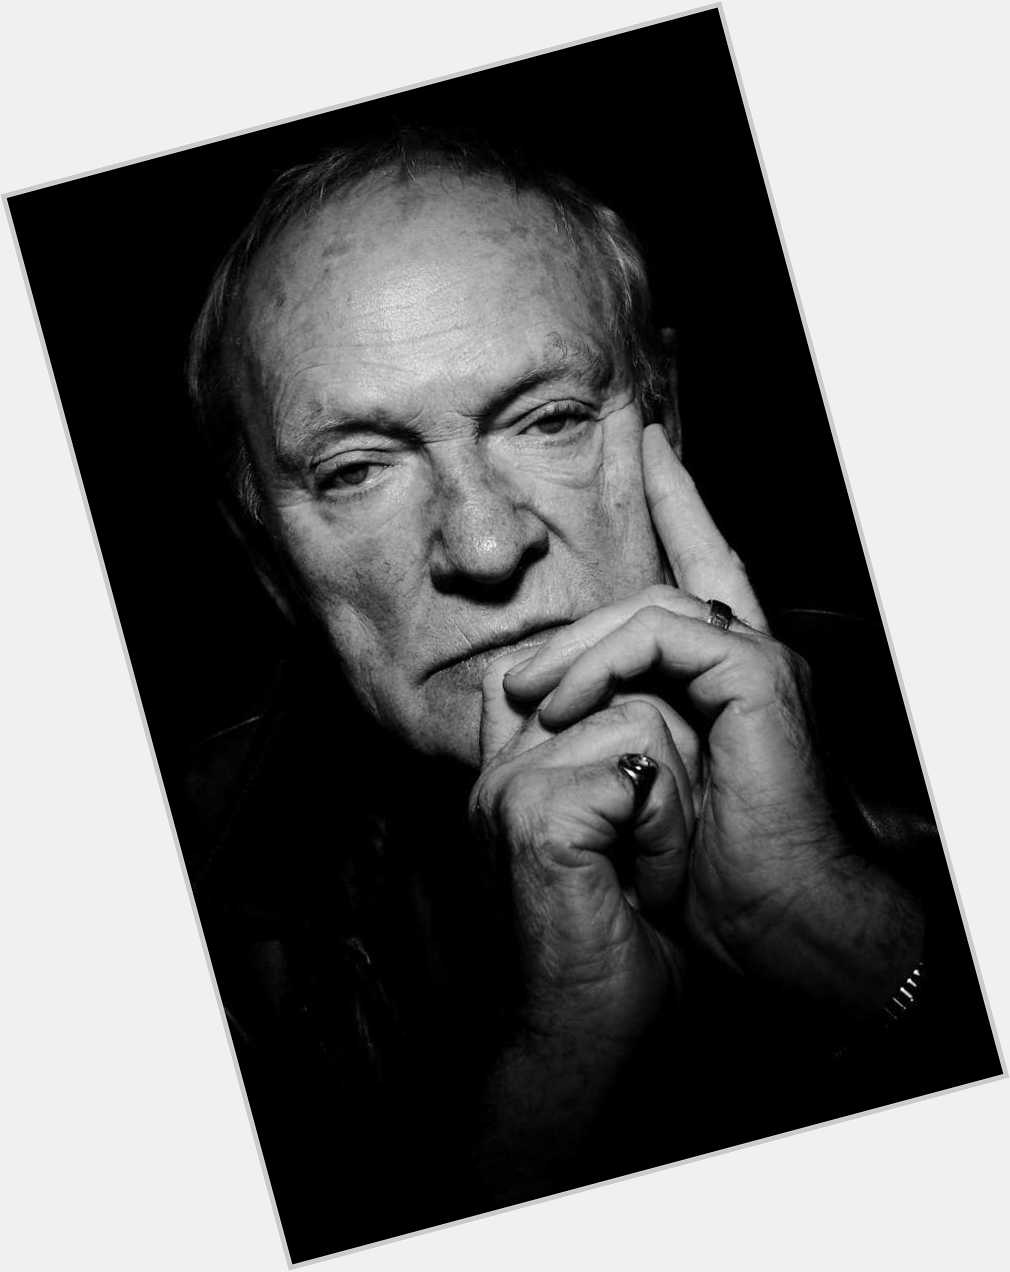 Hail to the King! Long live the King!
Happy 85th birthday to the one and only Julian Glover.
Many happy returns.   